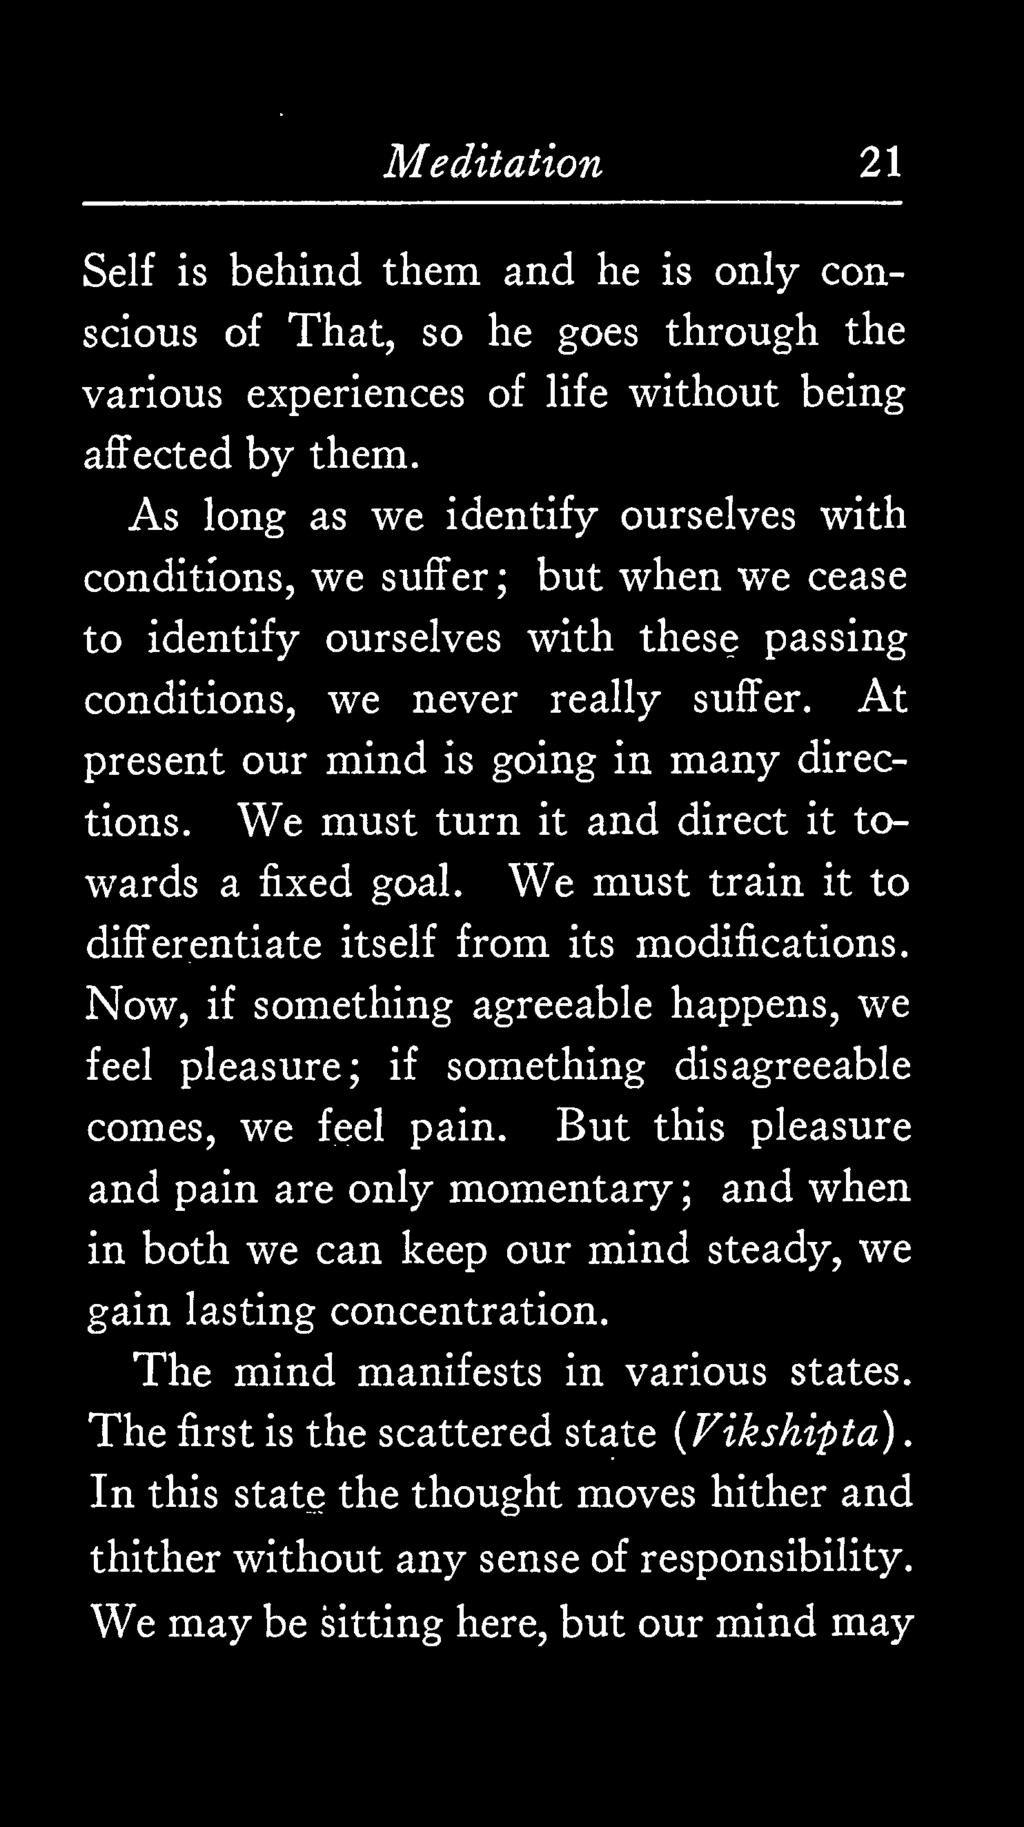 At present our mind is going in many directions. We must turn it and direct it towards a fixed goal. We must train it to differentiate itself from its modifications.